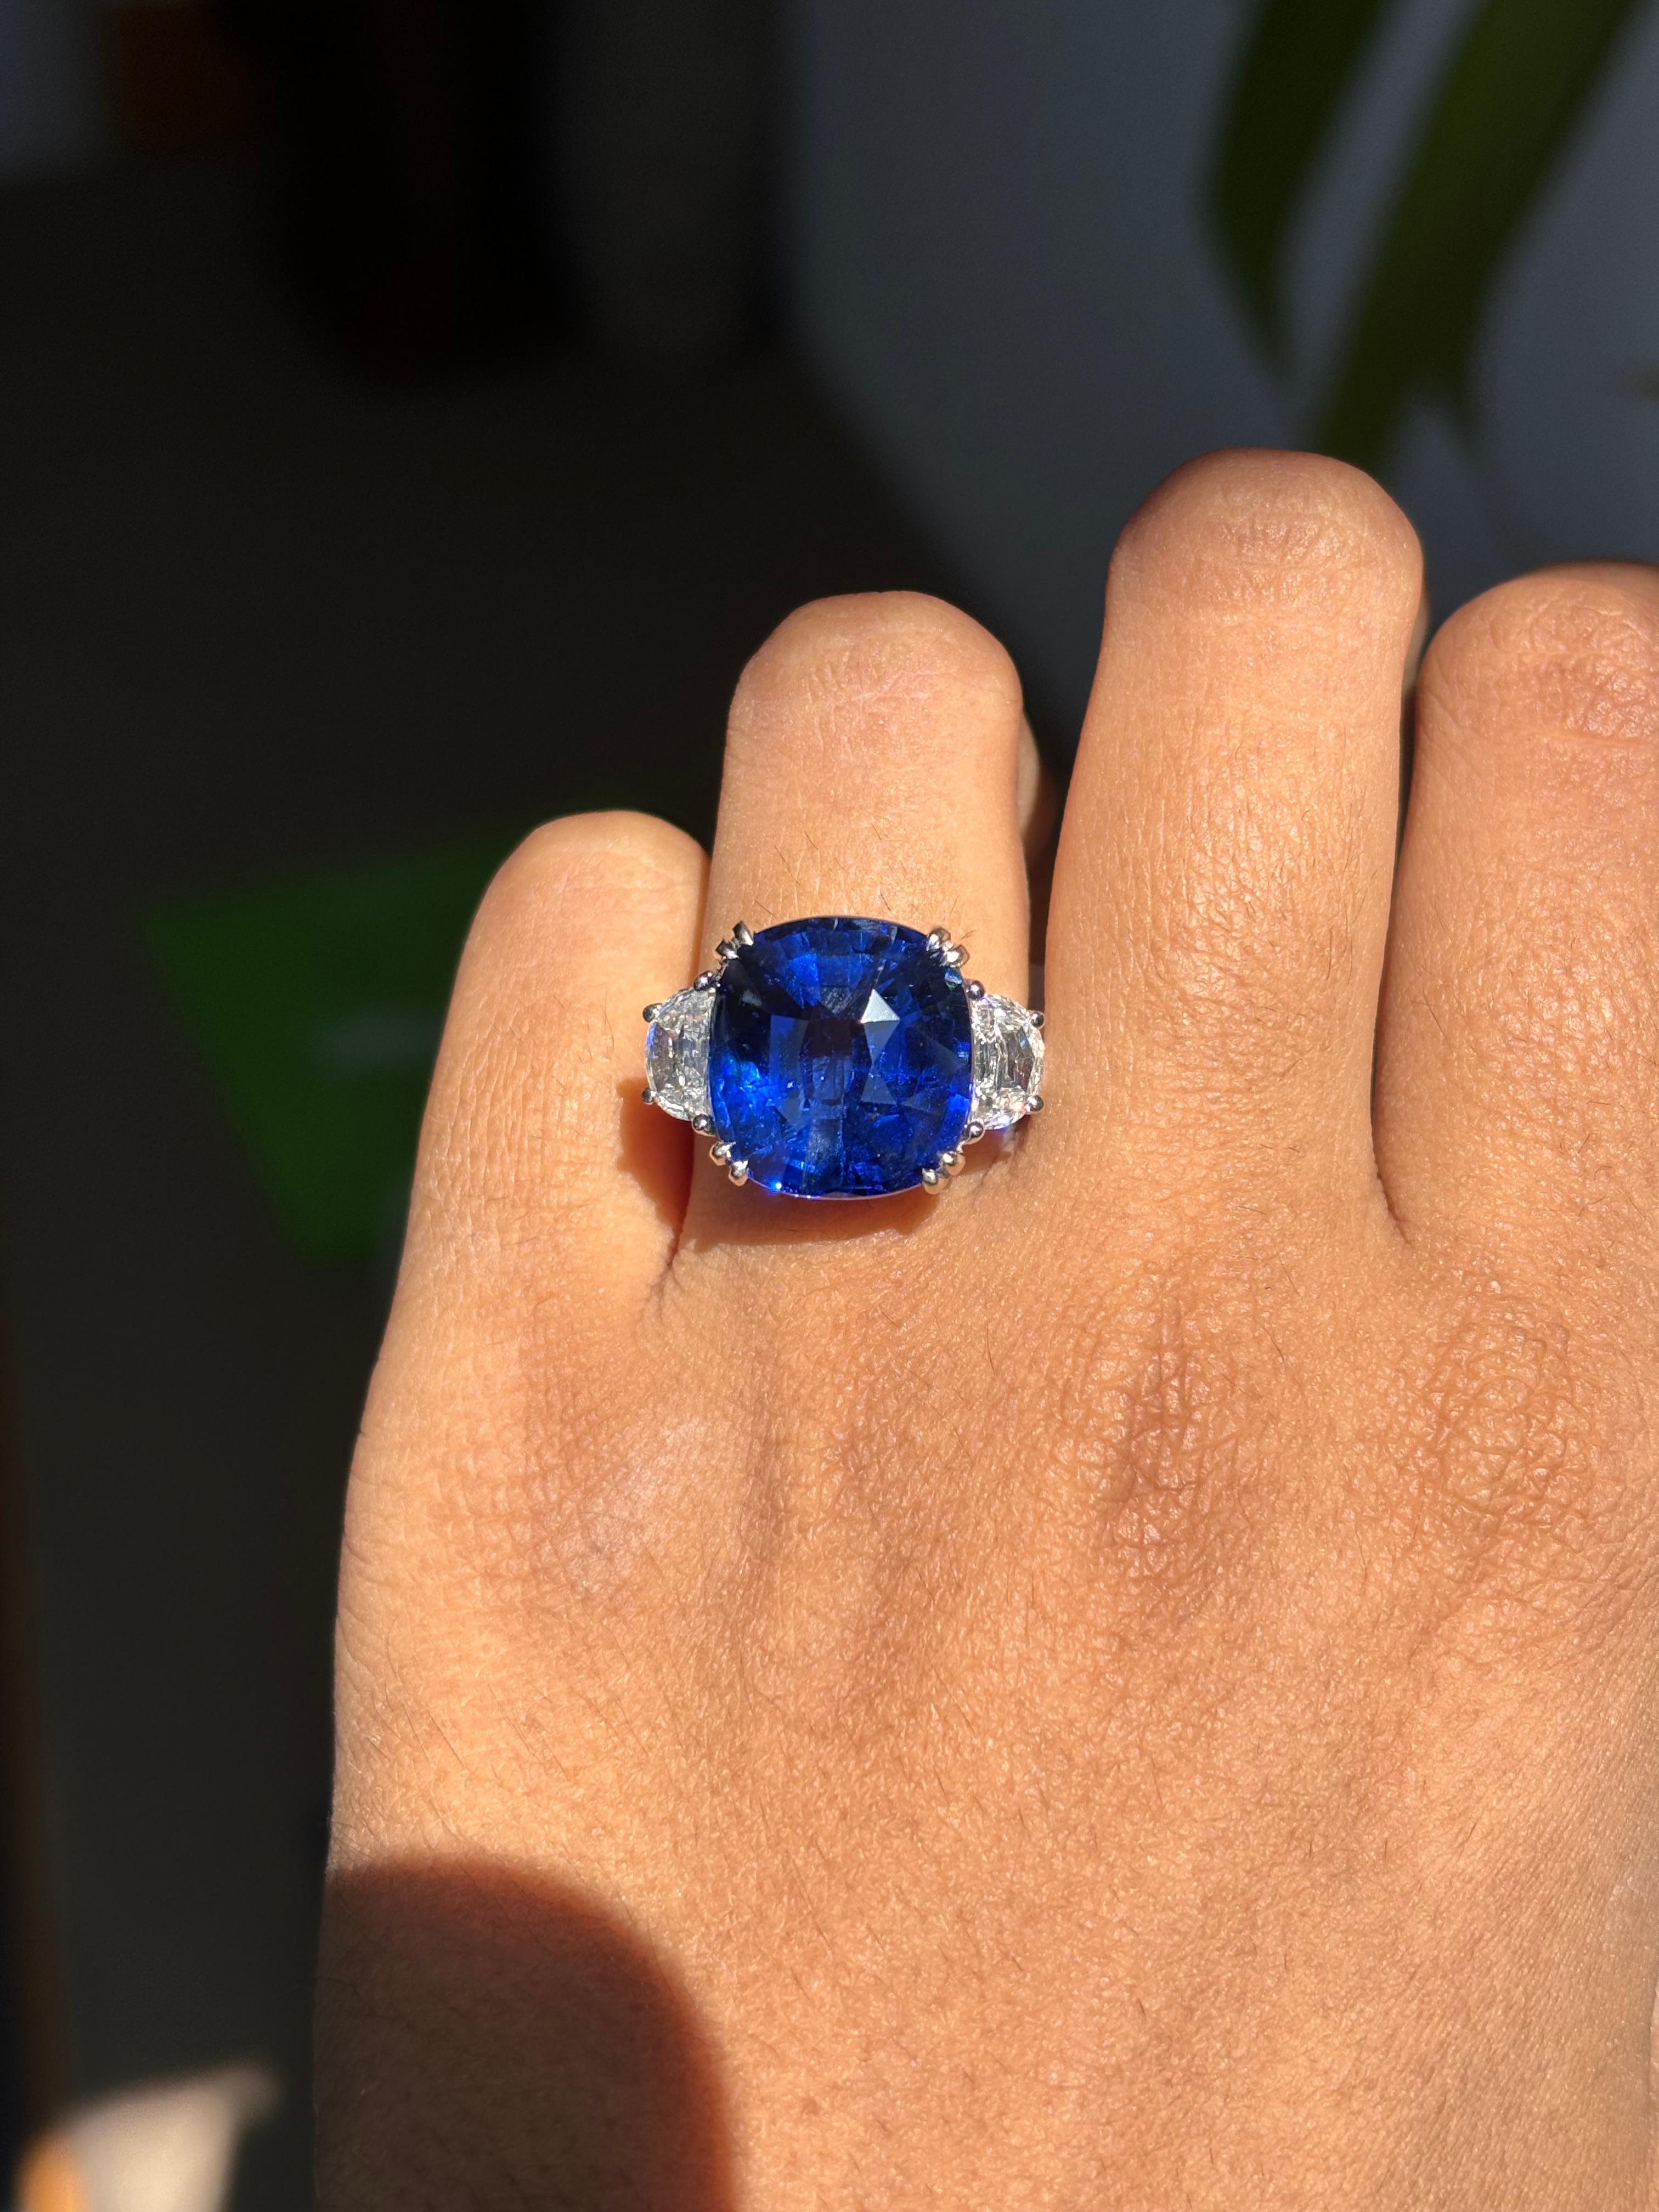 Magnificent 13.48 Carat Blue Sapphire Three Stone Ring in 18K White Gold For Sale 6